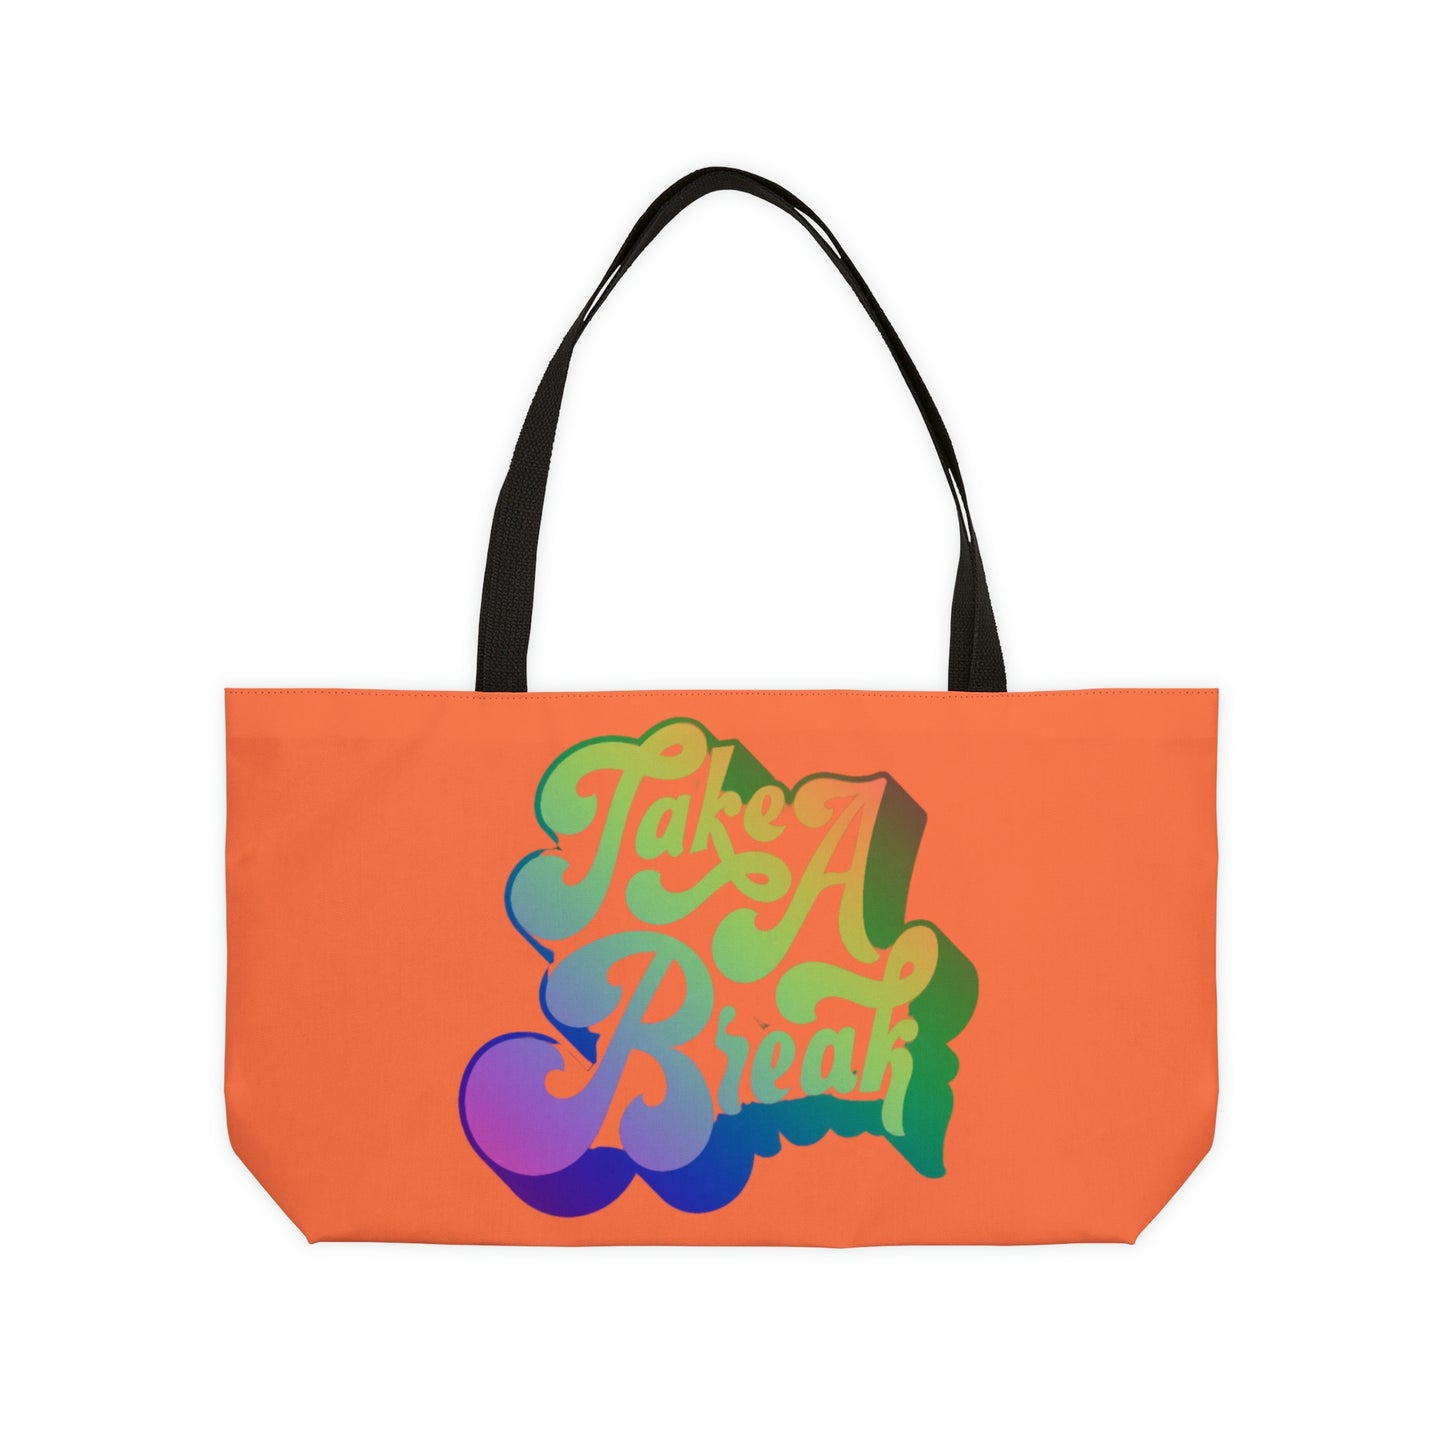 Take A Break Weekender Tote Bag | BKLA | Shoes & Accessories | shoes, hats, phone covers, tote bags, clutch bags